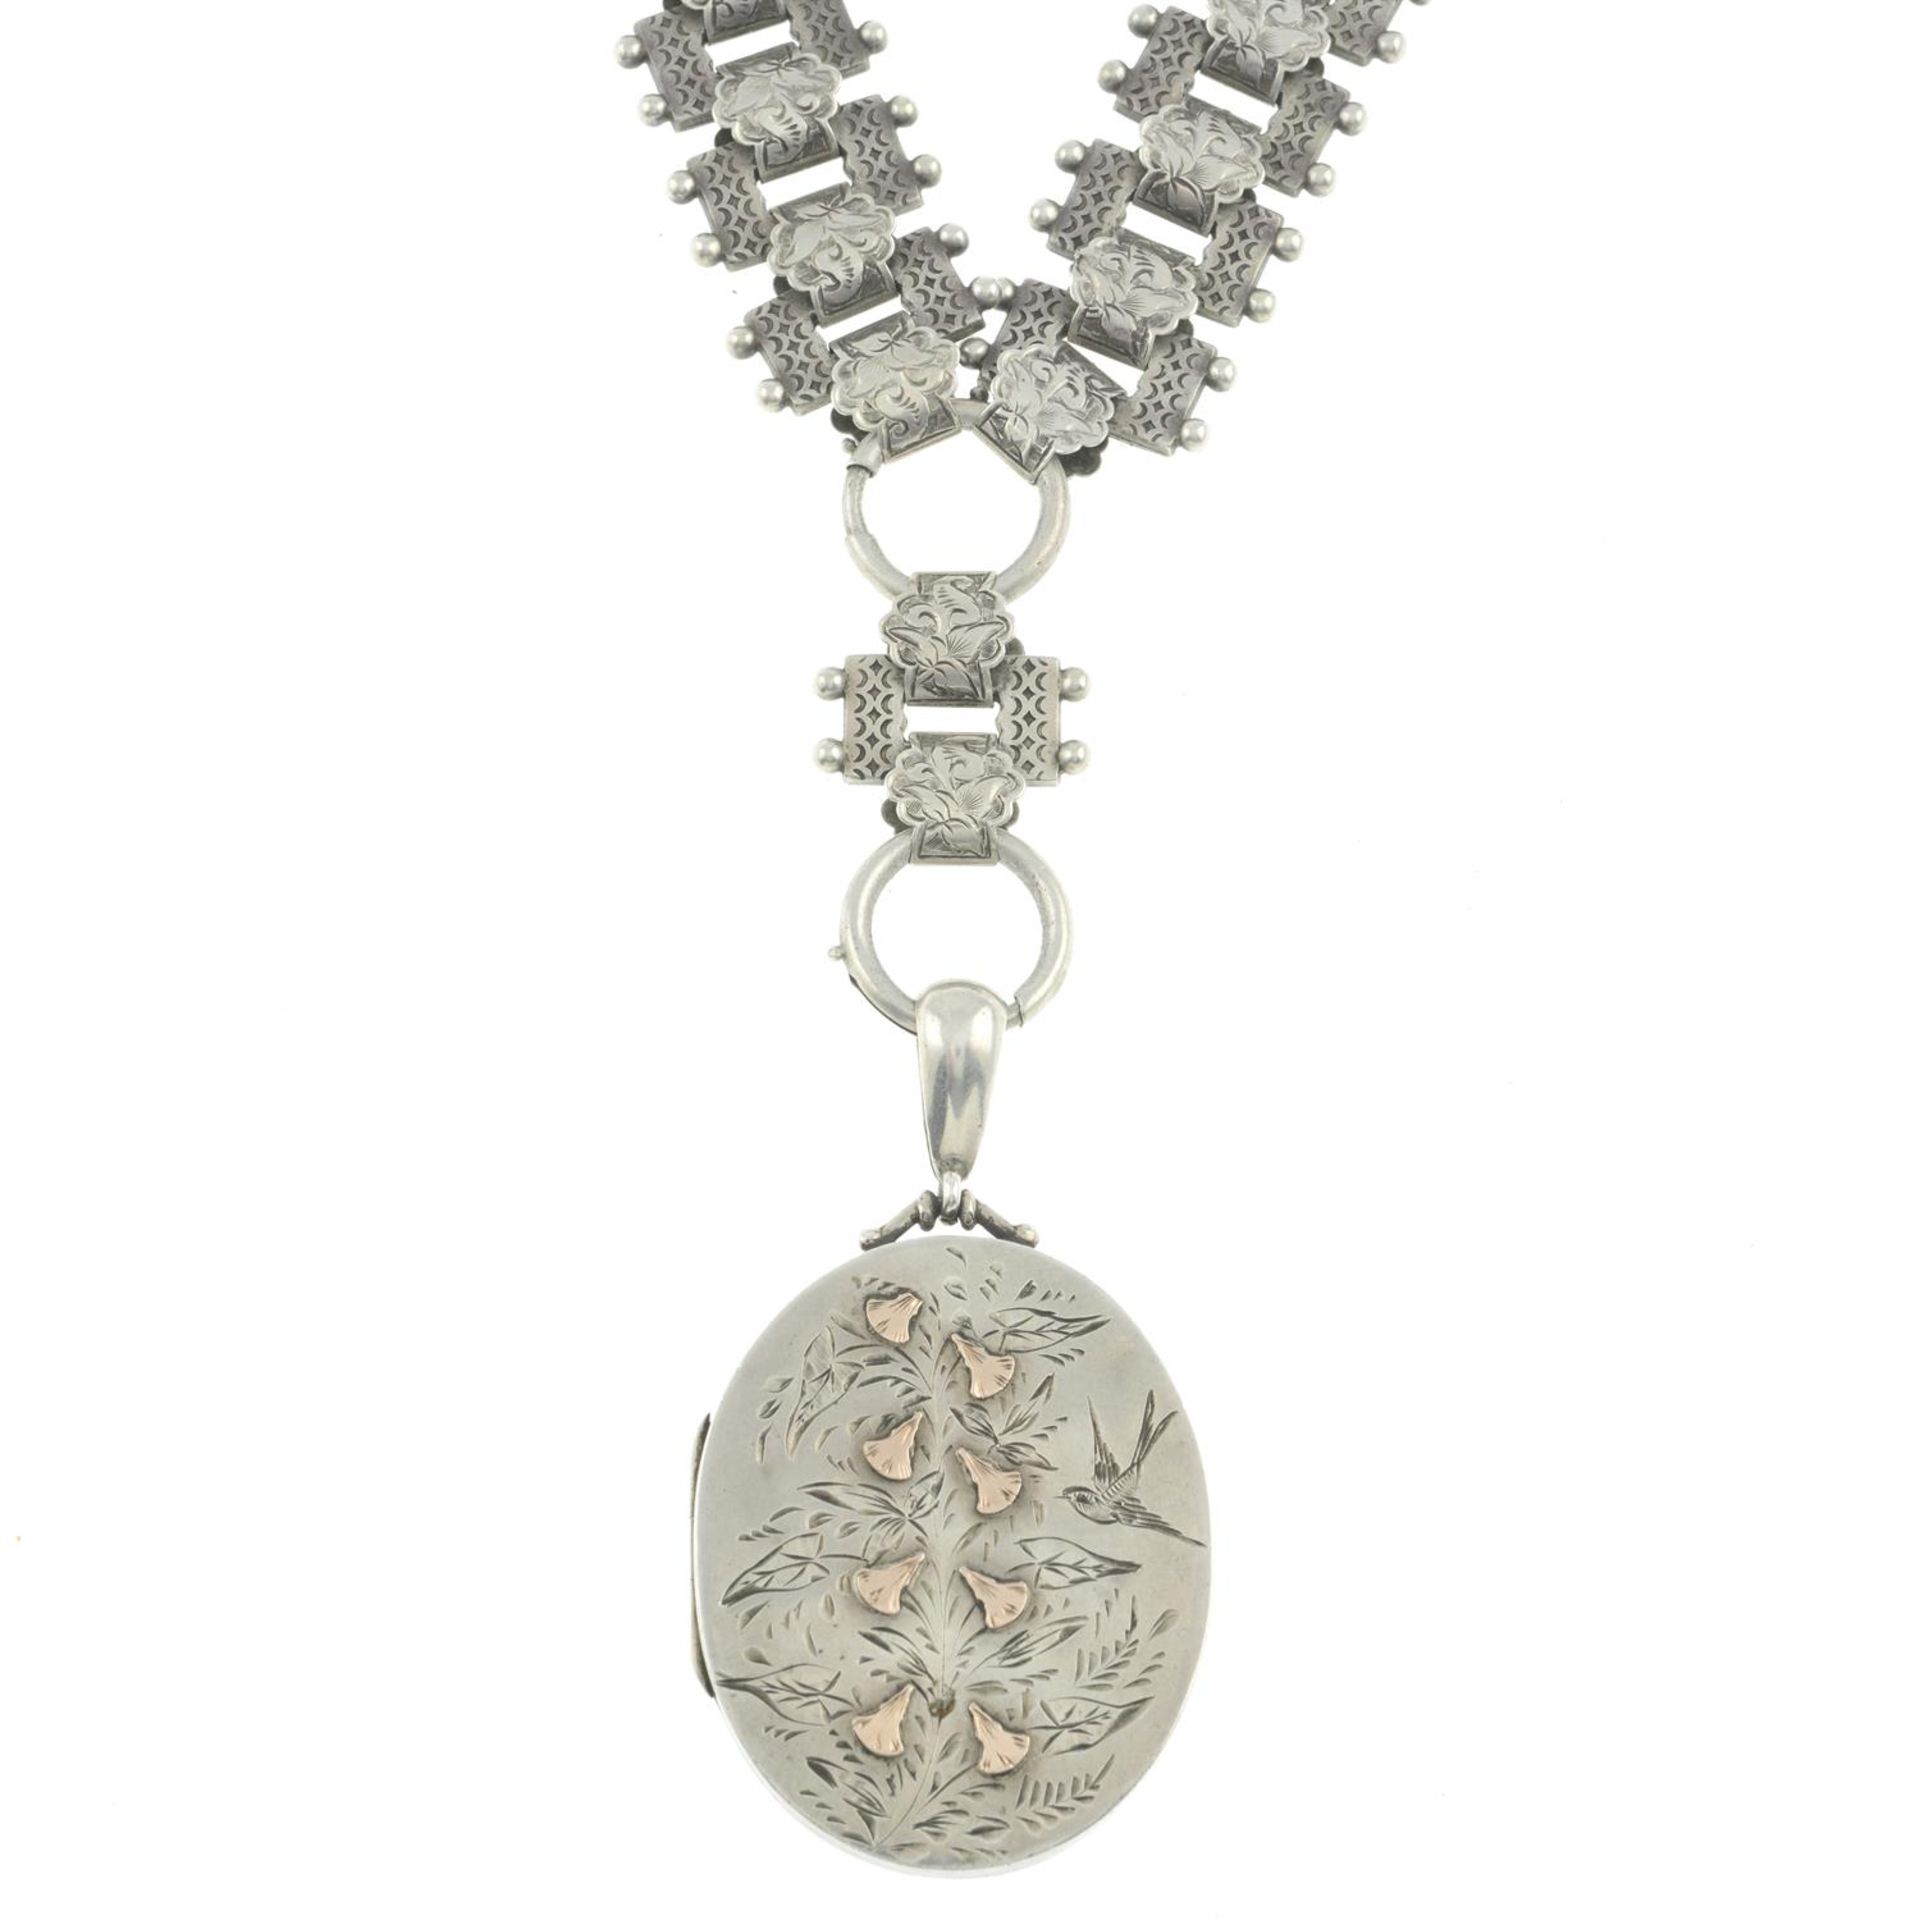 Victorian silver locket, with chain